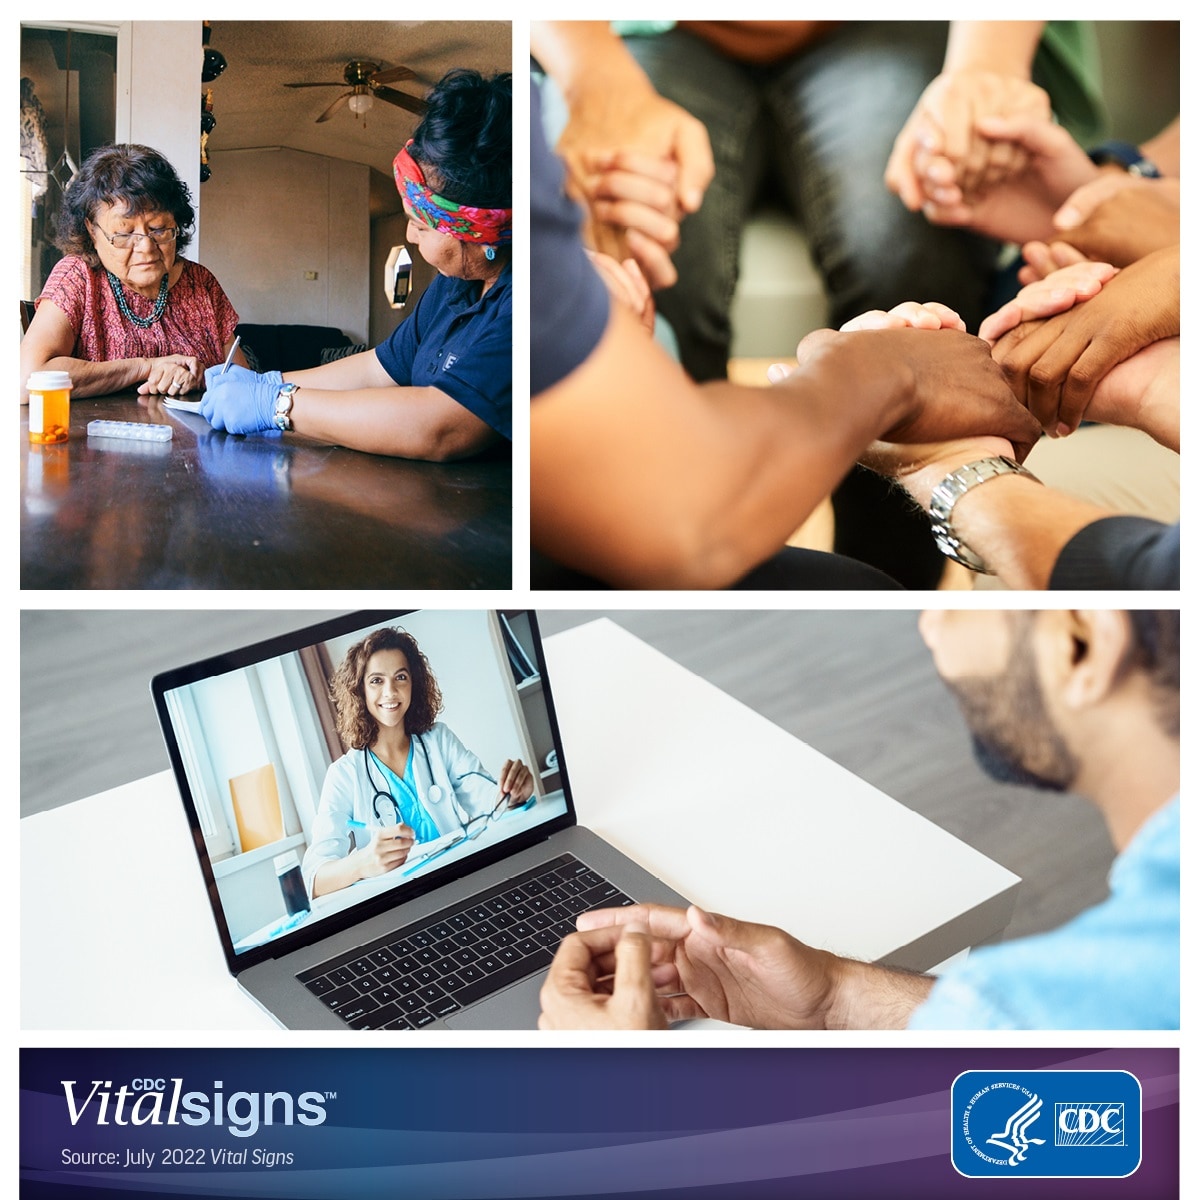 Photo collage of a nurse talking with a patient, people holding hands, and a doctor talking to a patient through a computer.